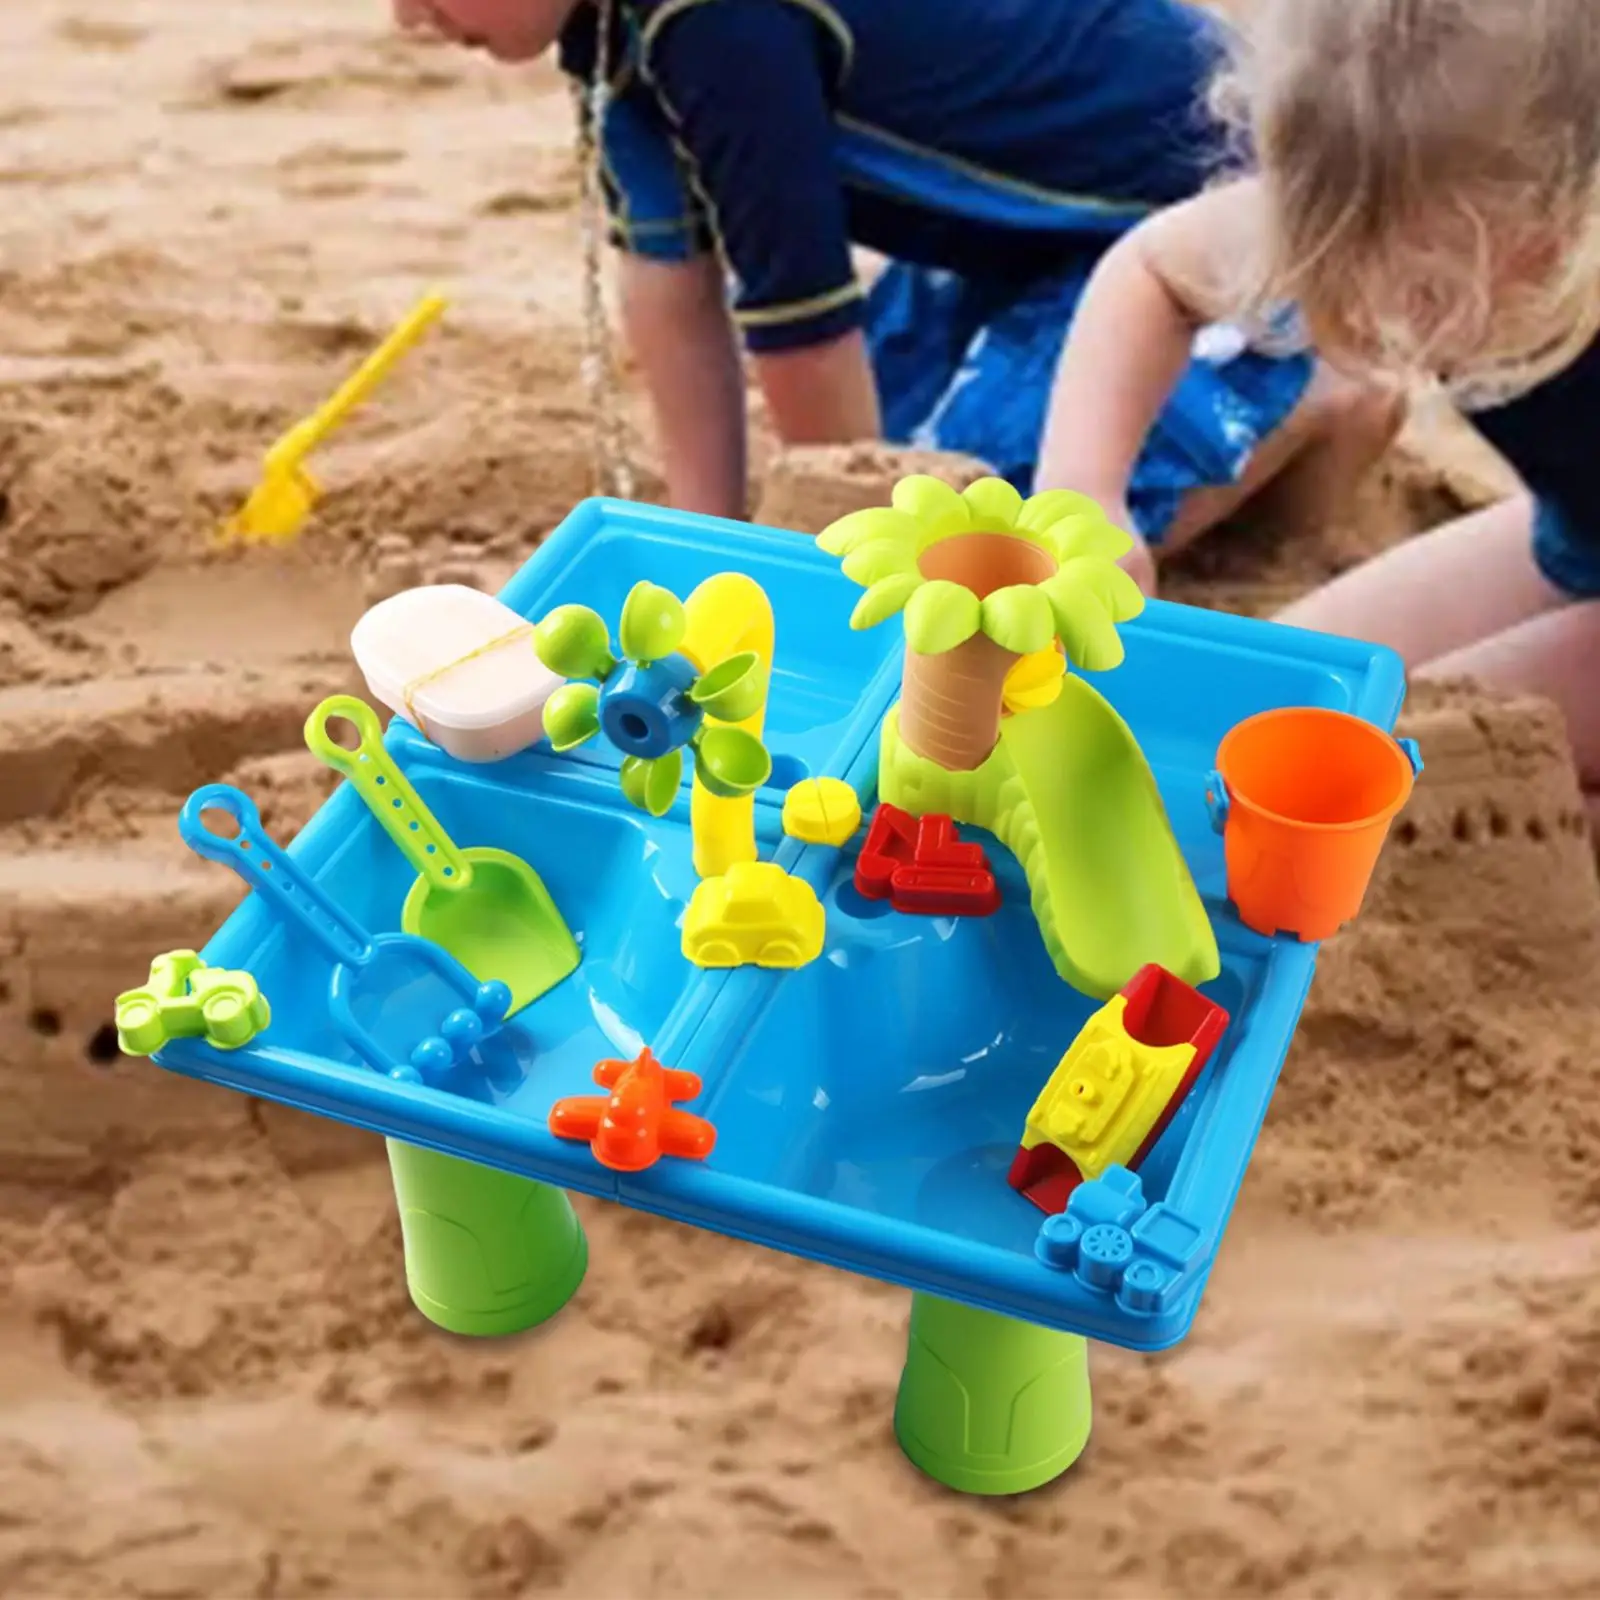 24 Pieces Sand Water Table Sensory Toys Beach Sandbox Table Playset for Children Girls Boys Toddler Kids Birthday Gifts